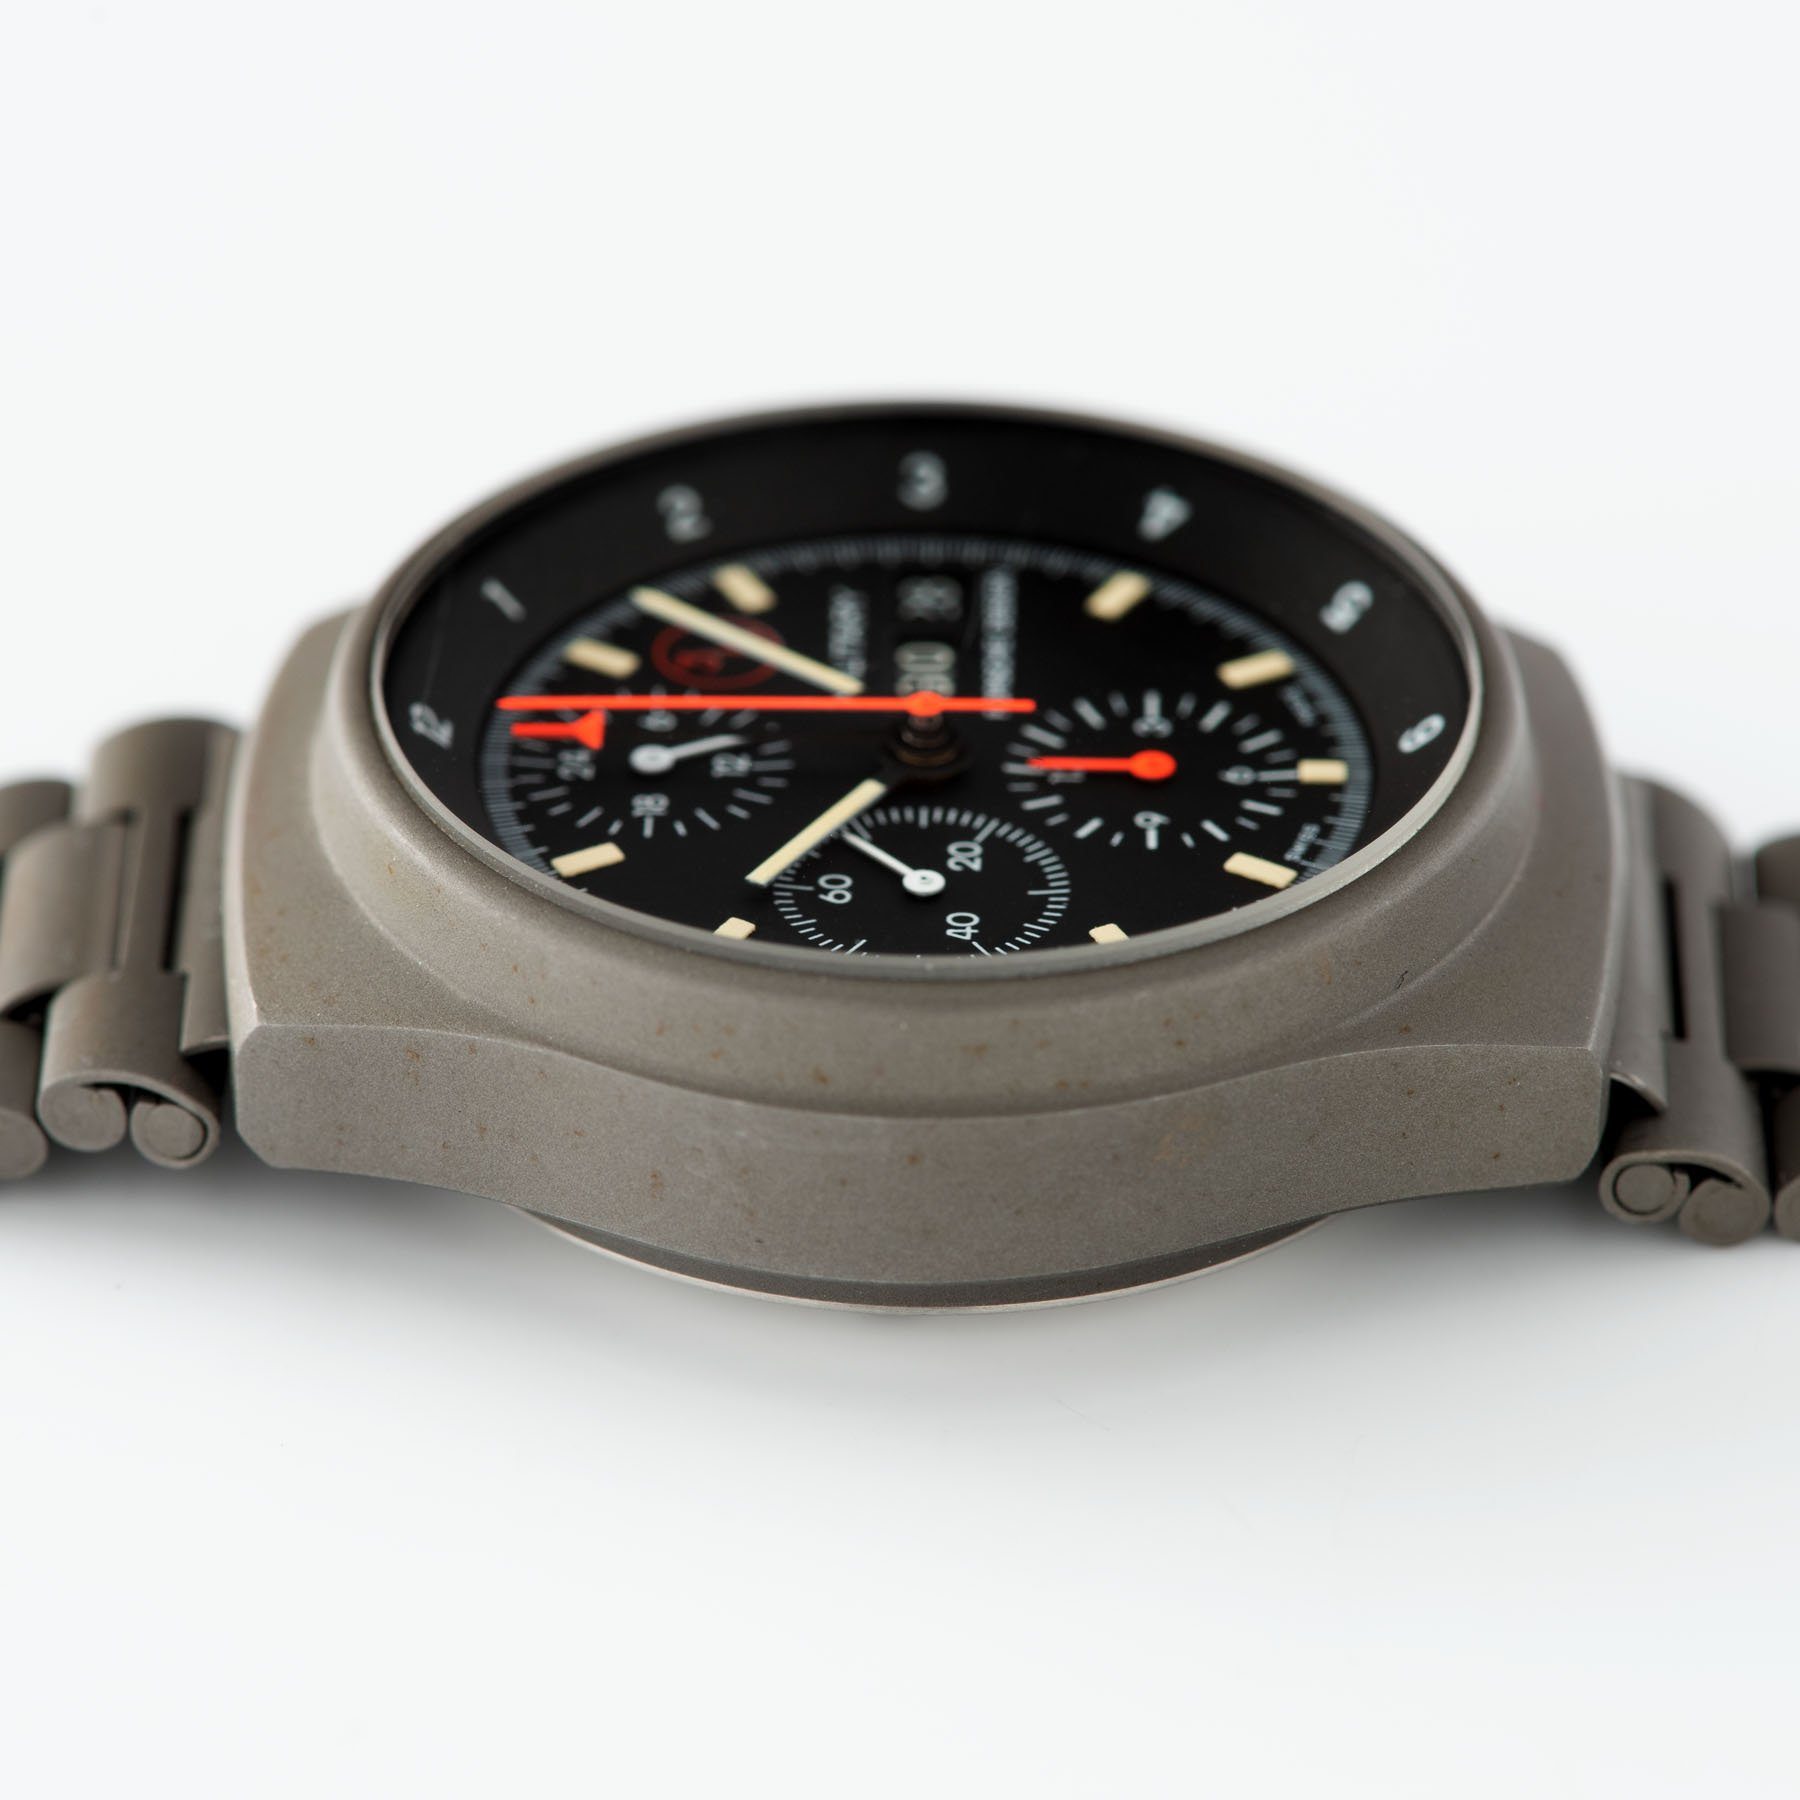 Porsche Design by Orfina 'Military' Chronograph Reference 7177